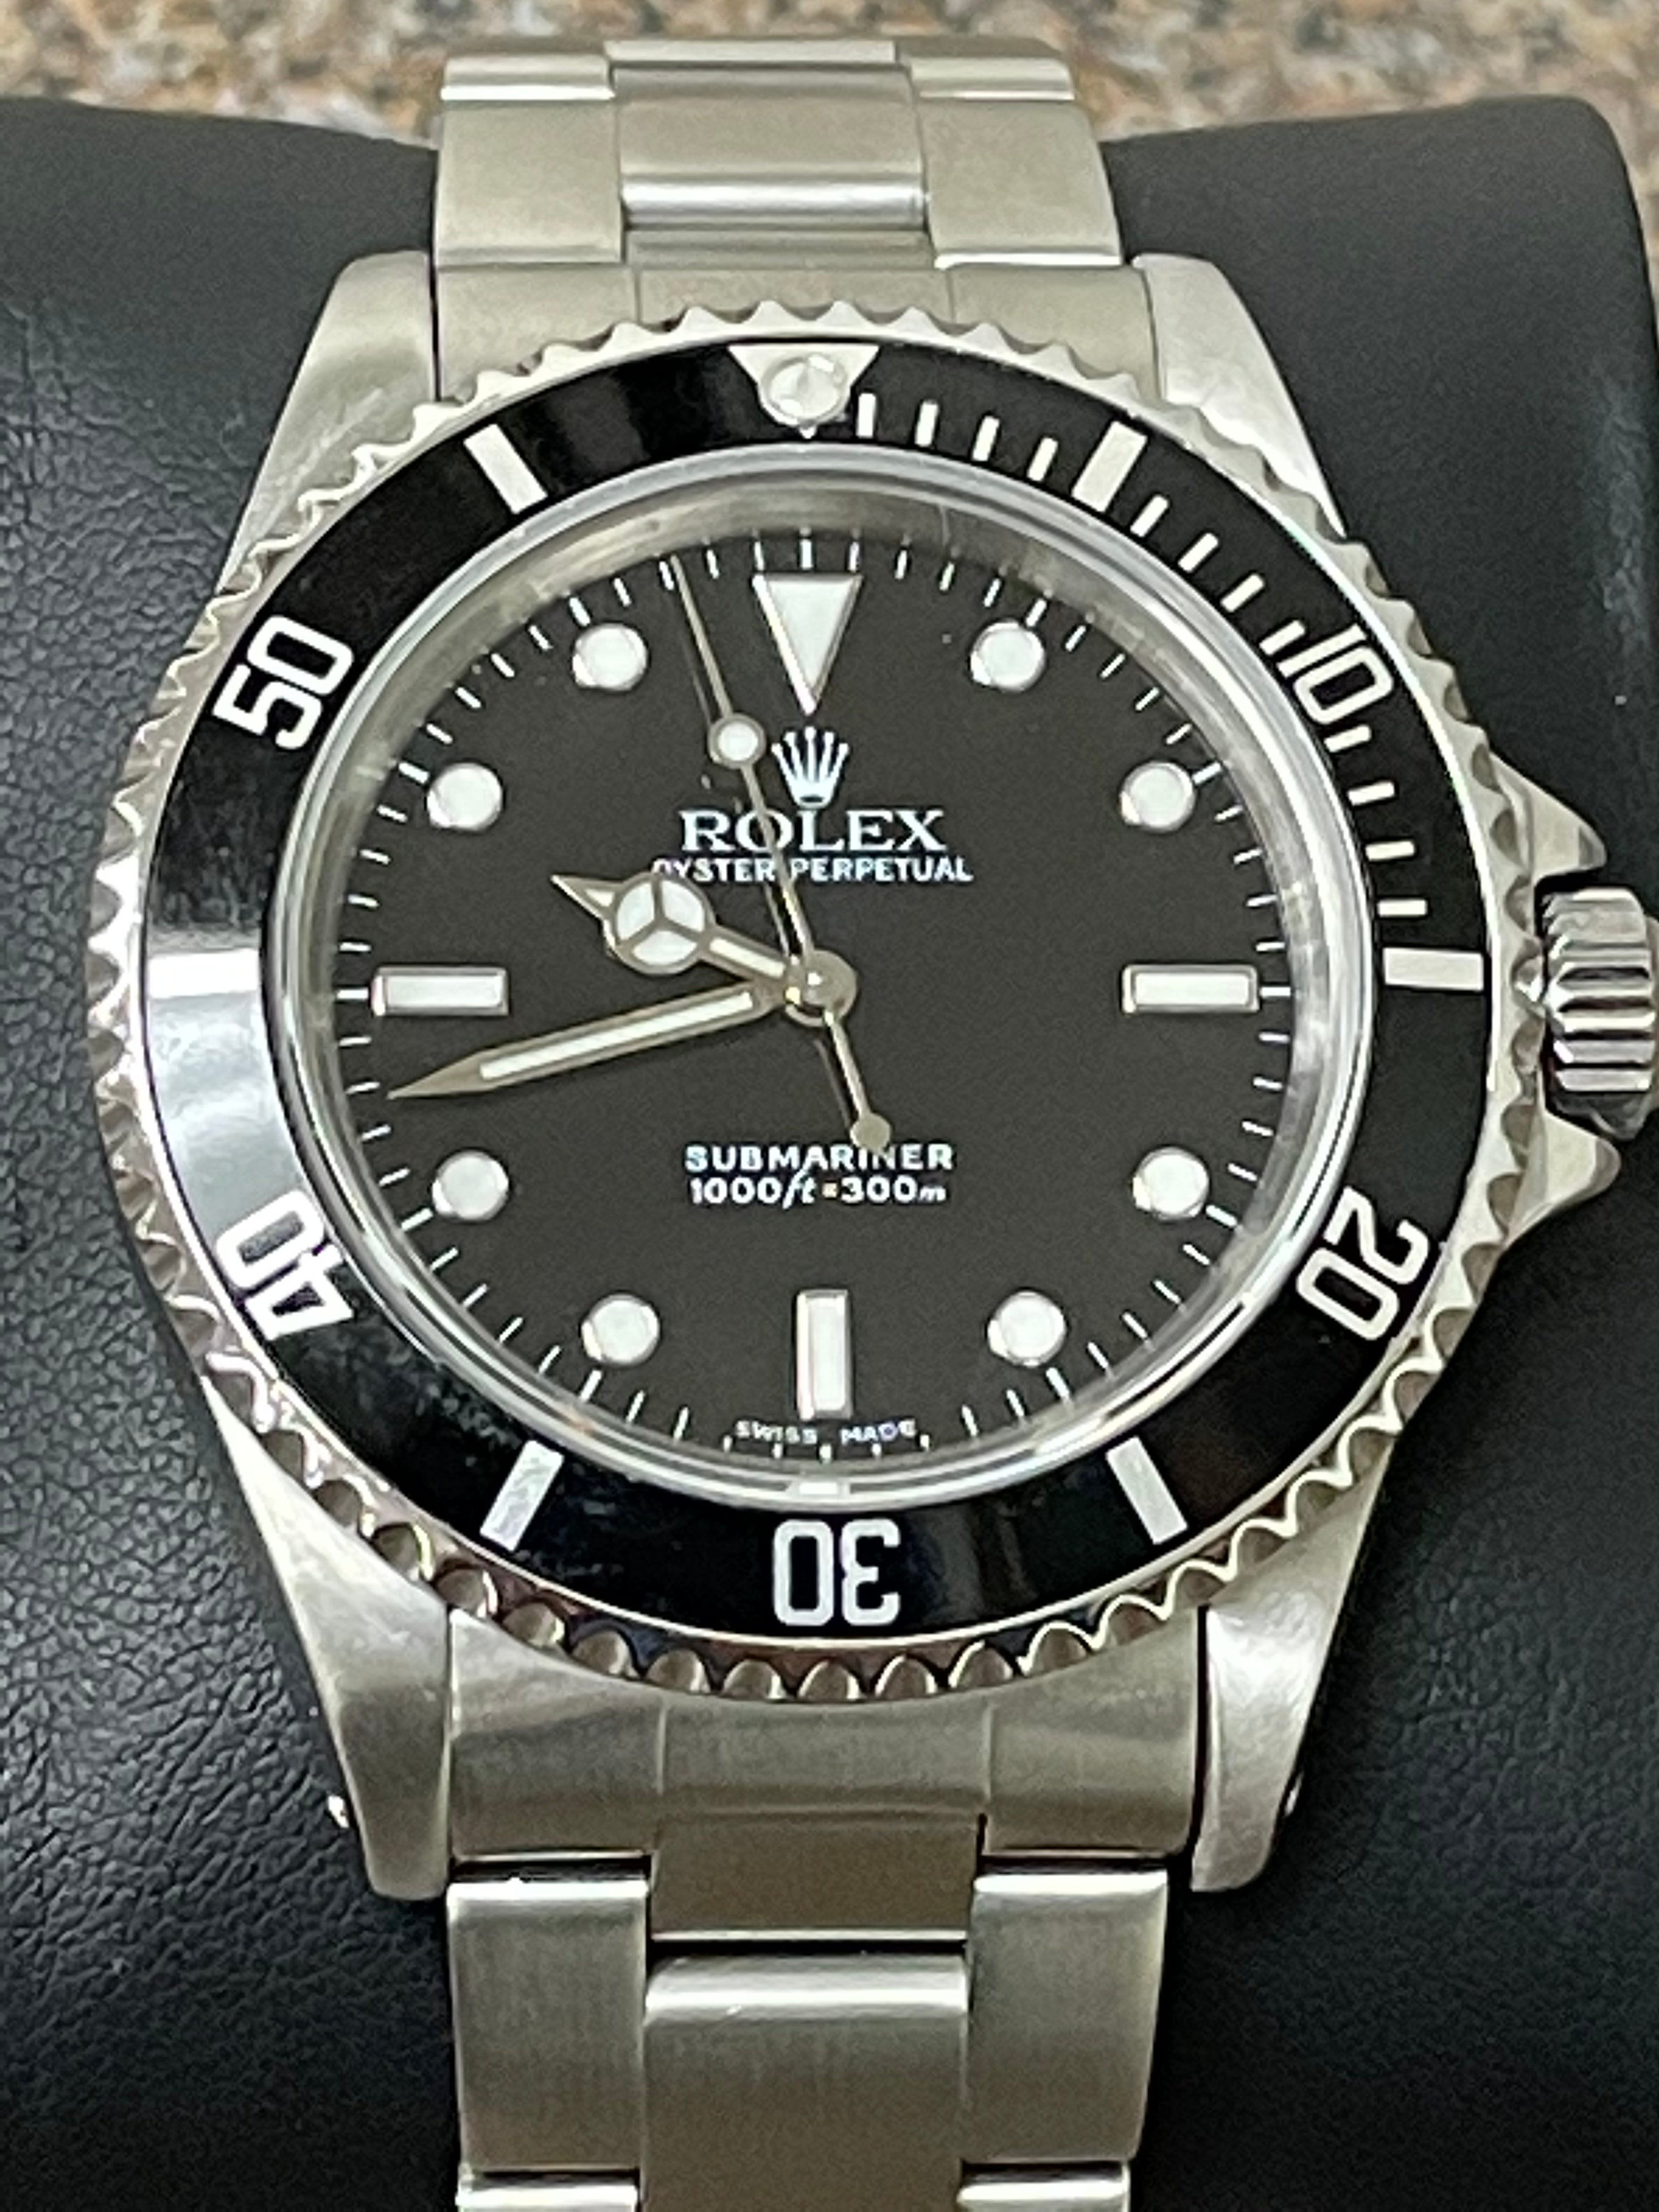 Pre-Owned Stainless Steel Submariner 14060